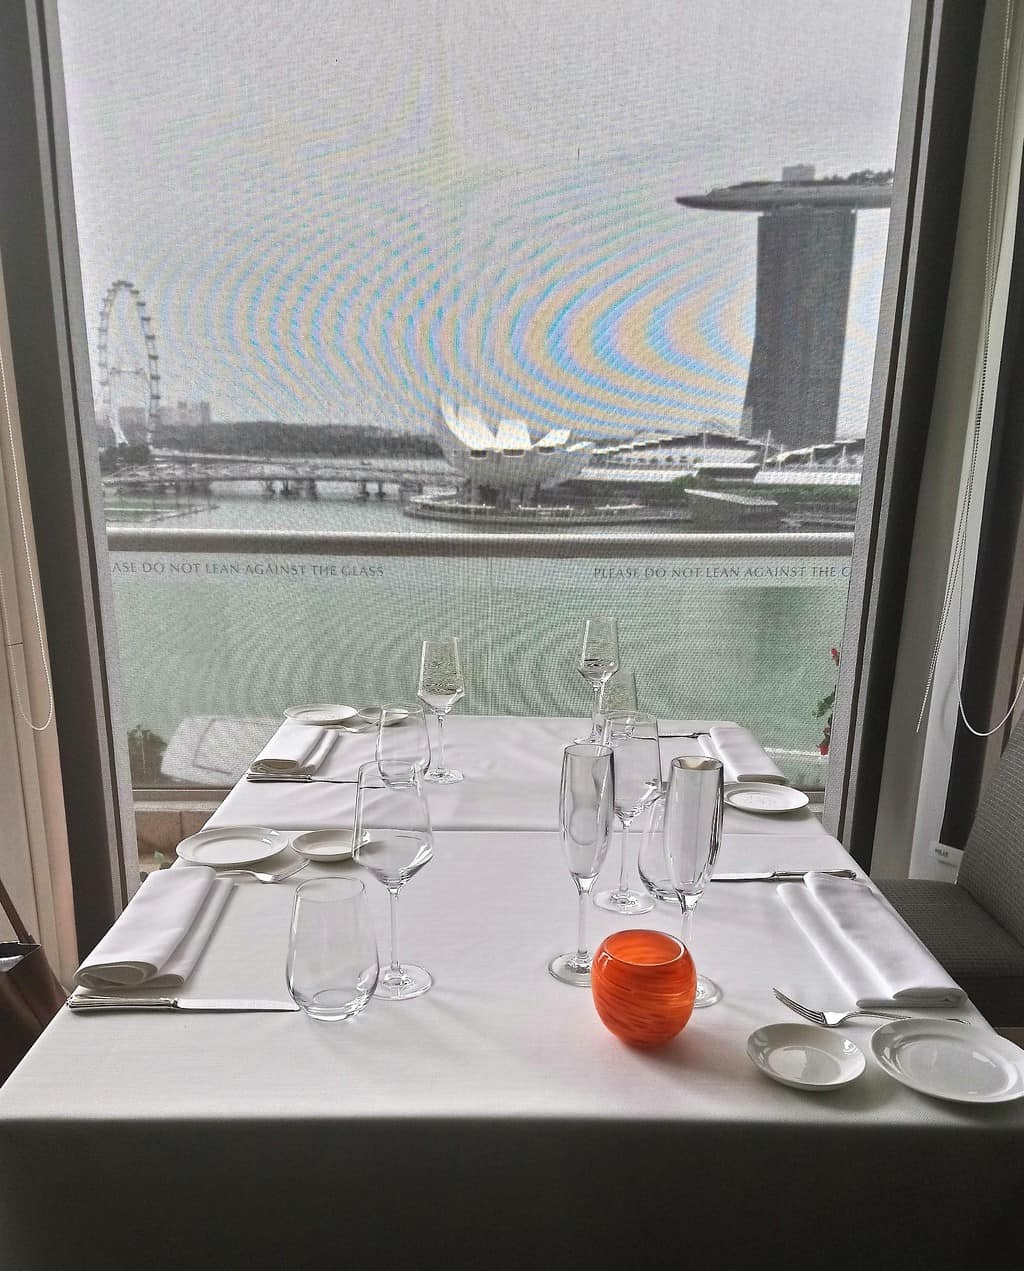 View of the Marina Bay from a table in The Lighthouse Restaurant at The Fullerton Hotel in Singapore